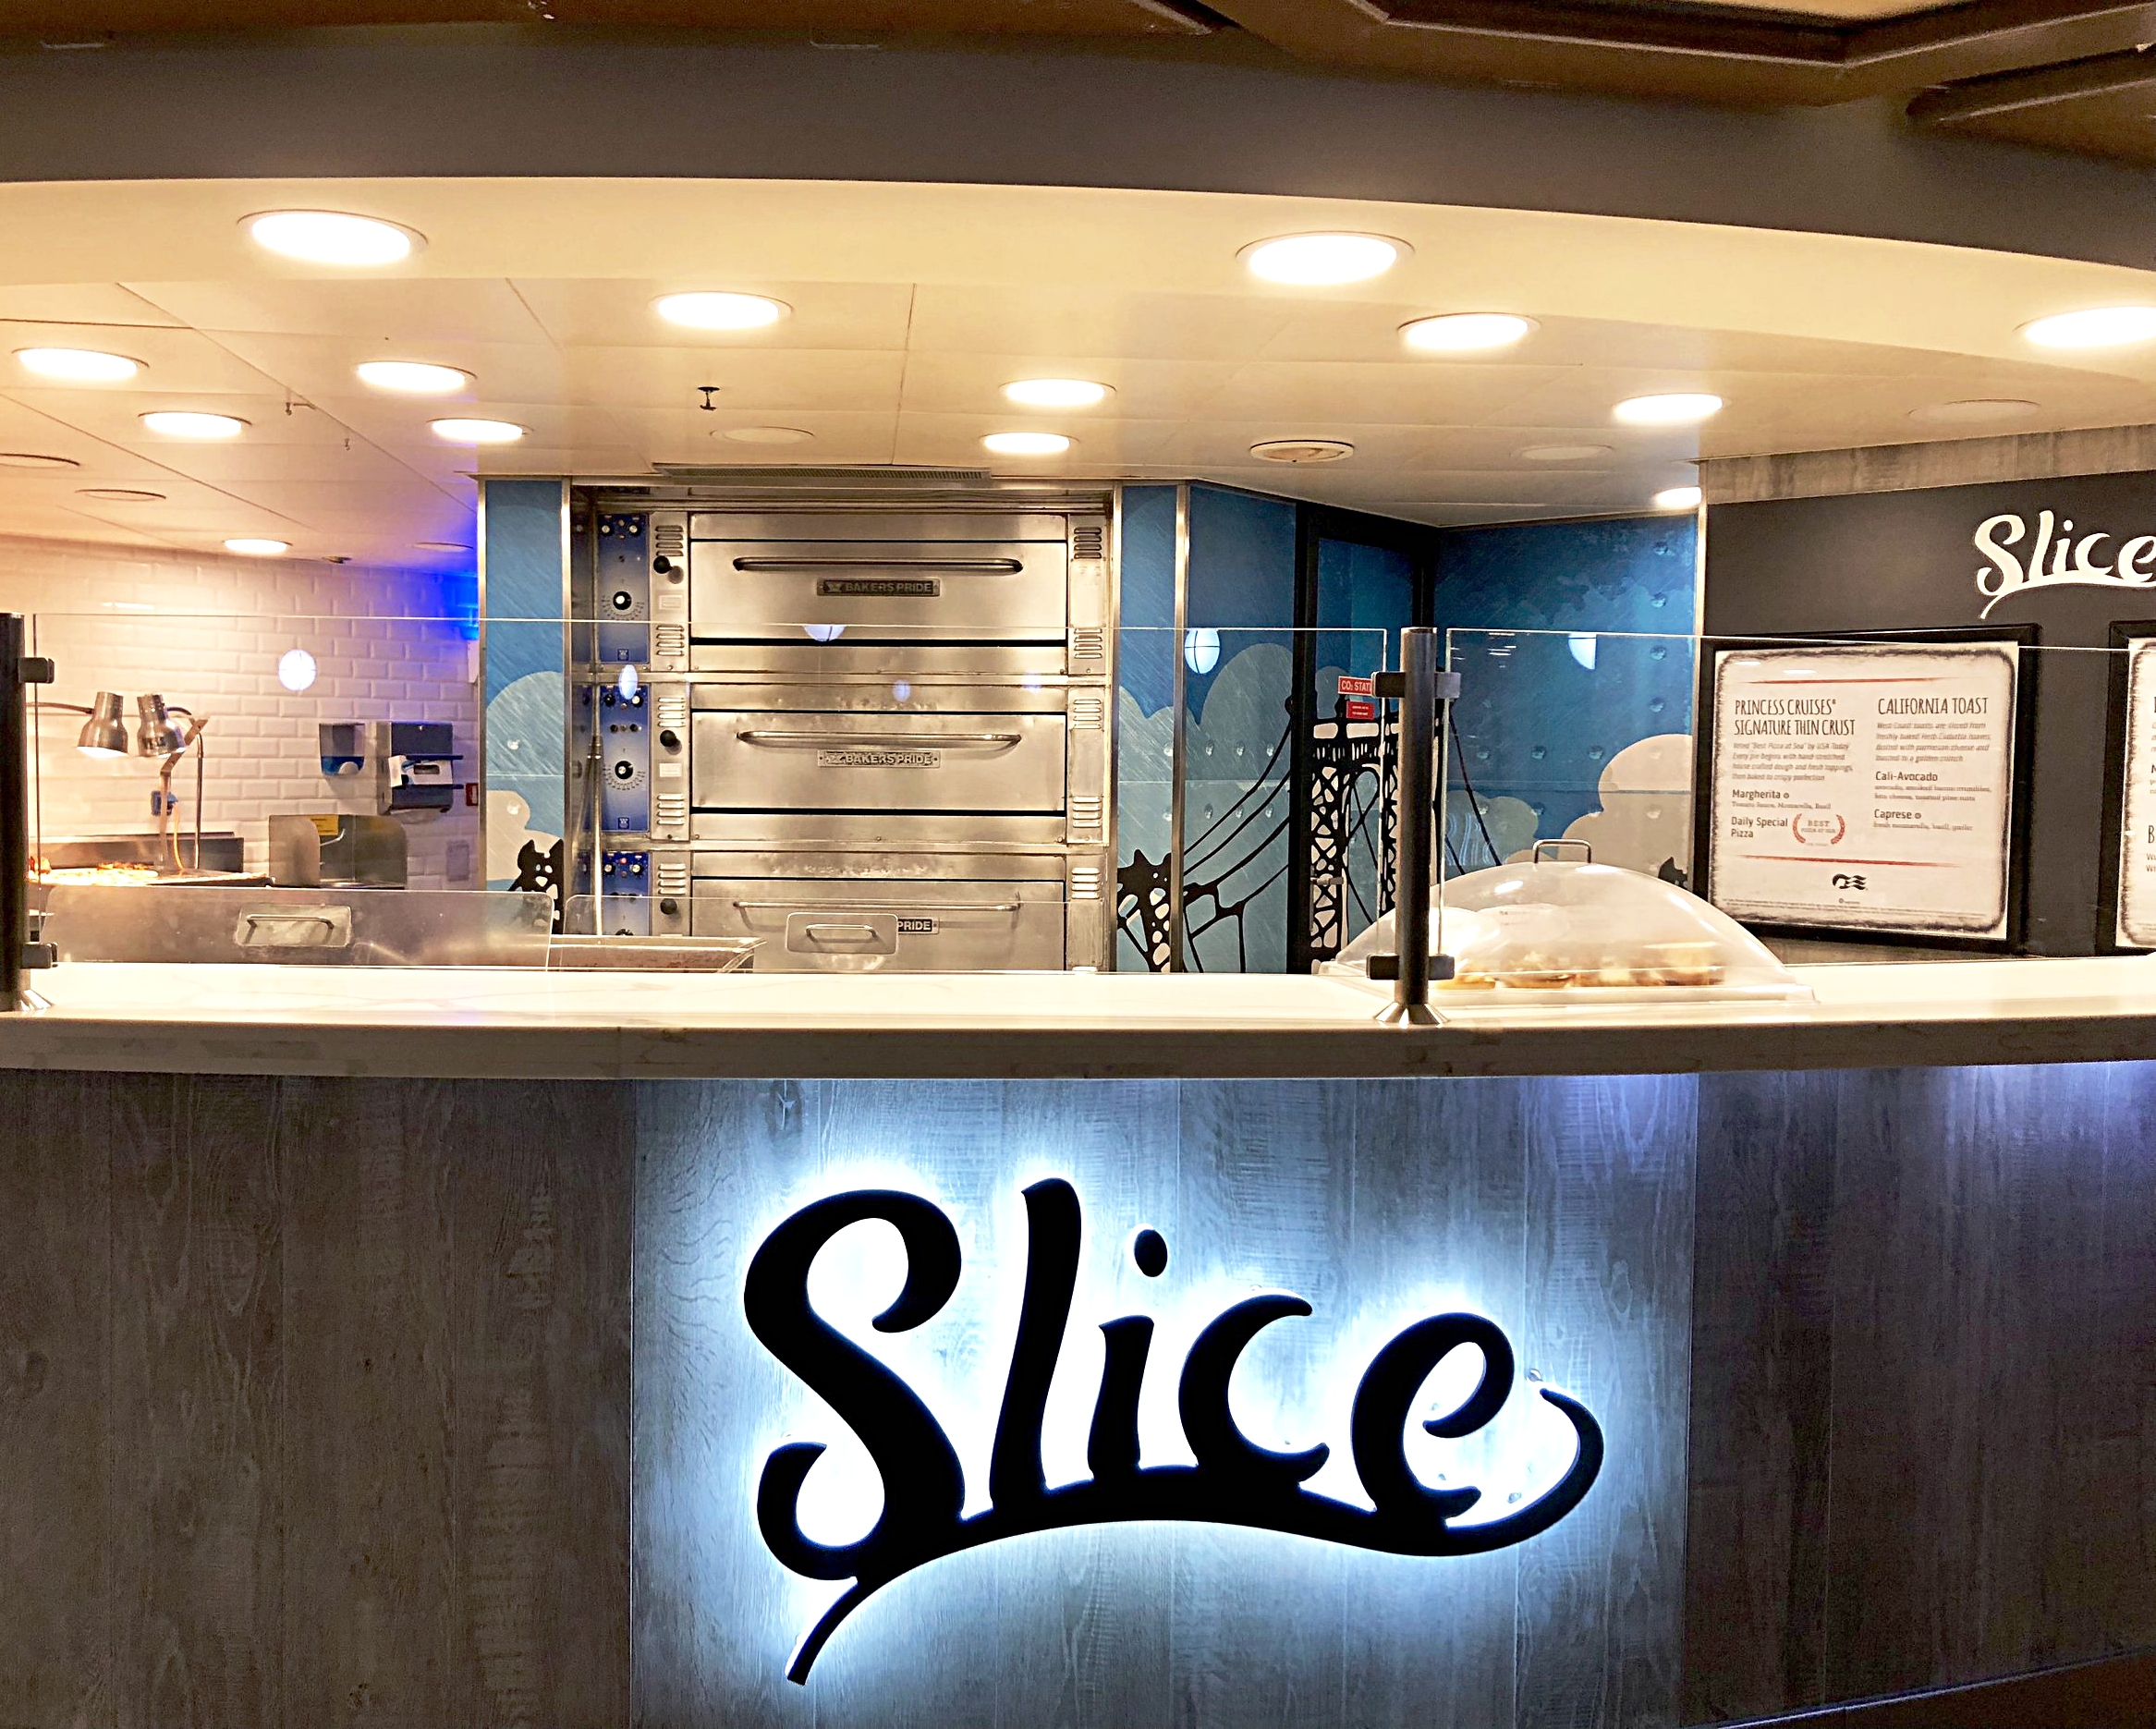  Slice, the outside pizza bar - serving delicious pizzas all day and late into the night.  